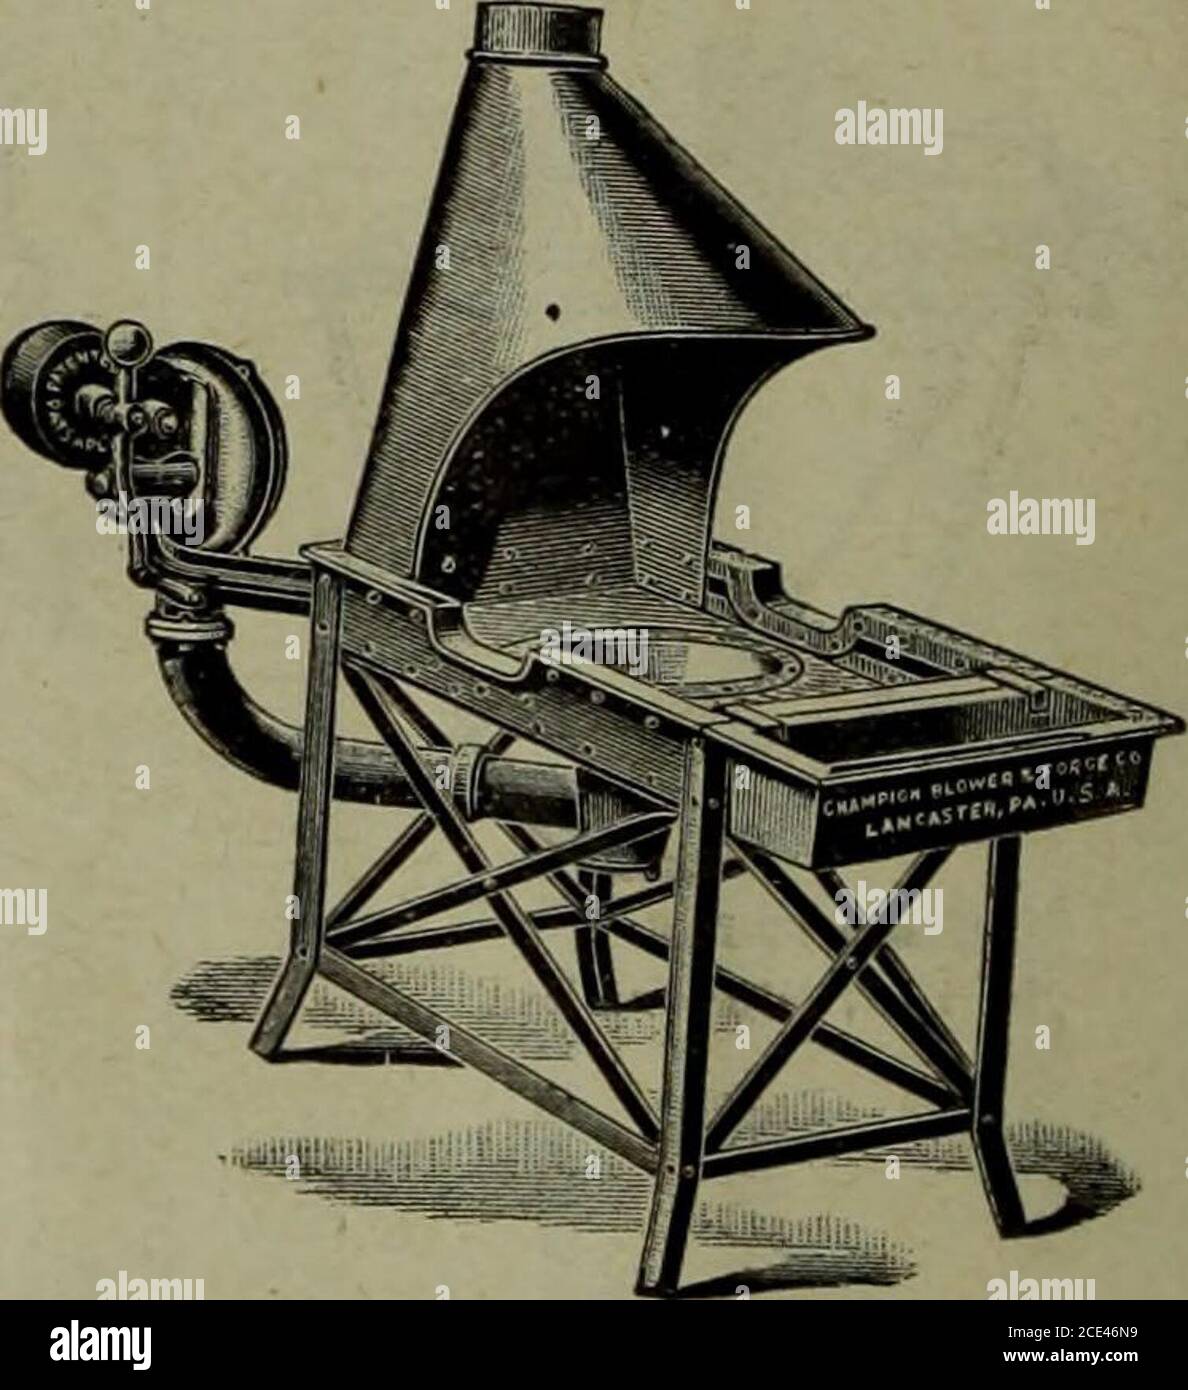 Hardware merchandising (January-March 1908) . No. 400 CHAMPION BLOWER This  Blower has revolutionized the world in making hand blast.The adjustable  ball-bearings are made from the highest grade tool steel. Thecup and